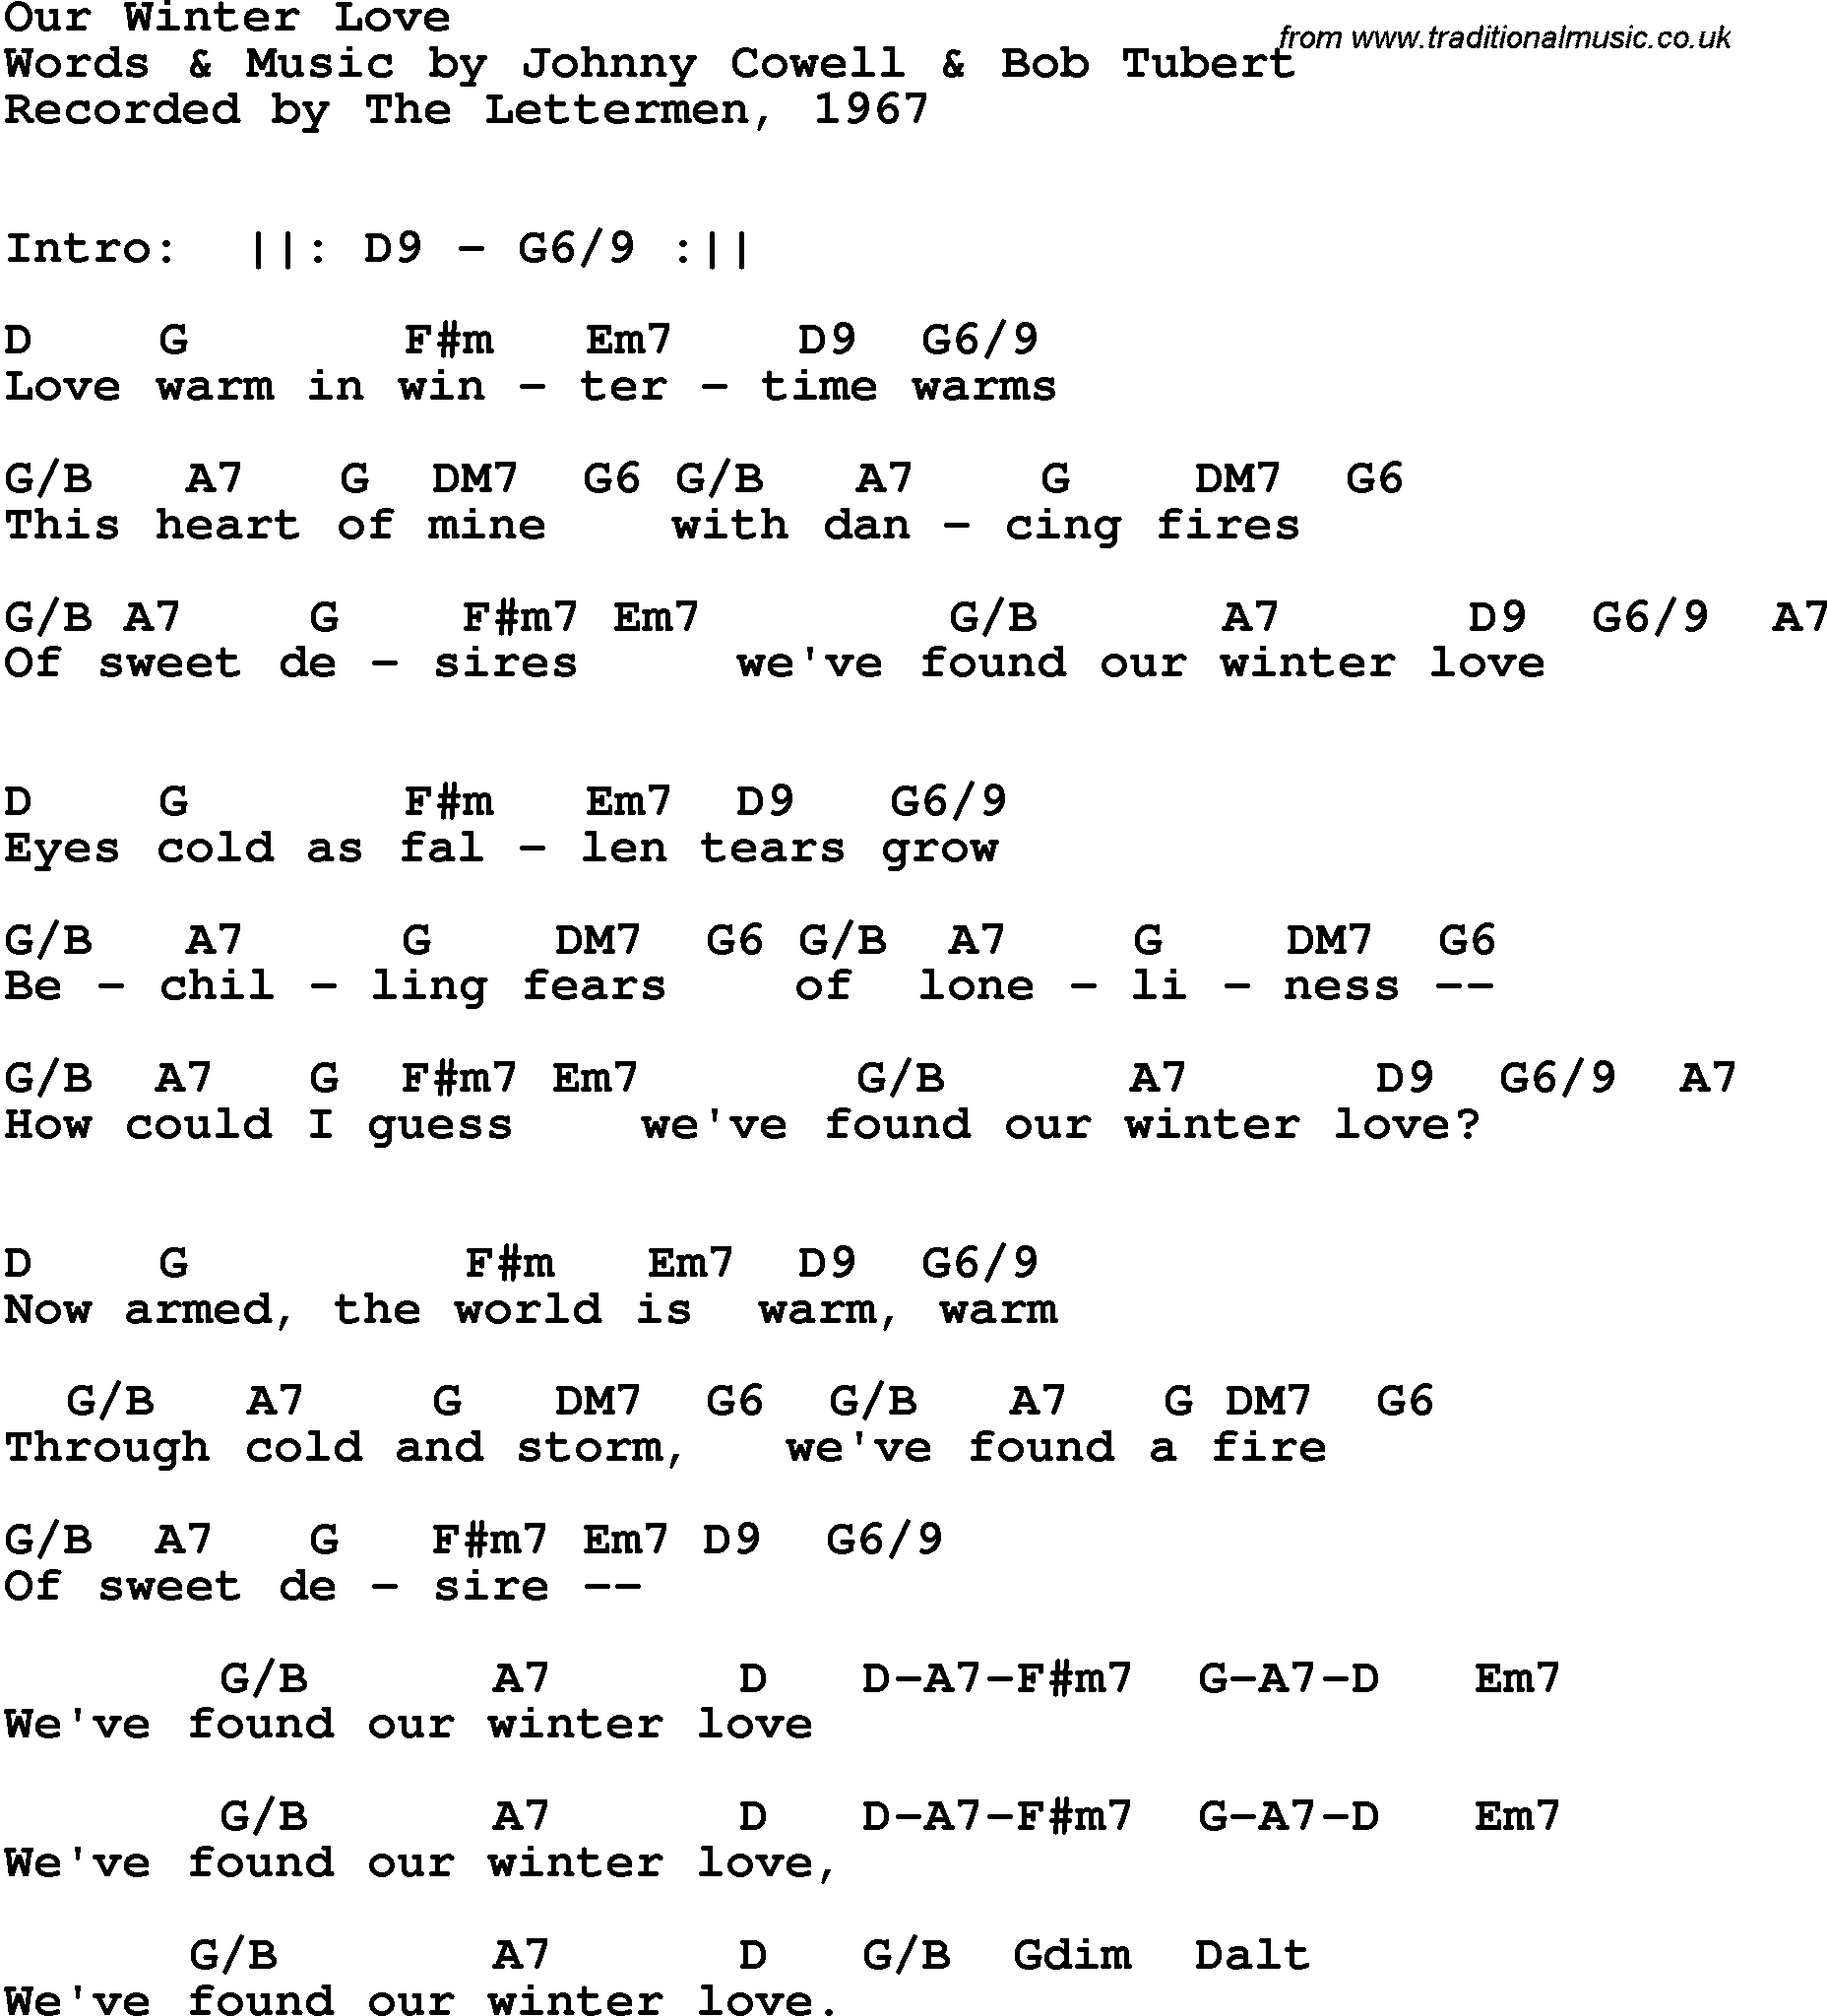 Song Lyrics with guitar chords for Our Winter Love - The Lettermen, 1967